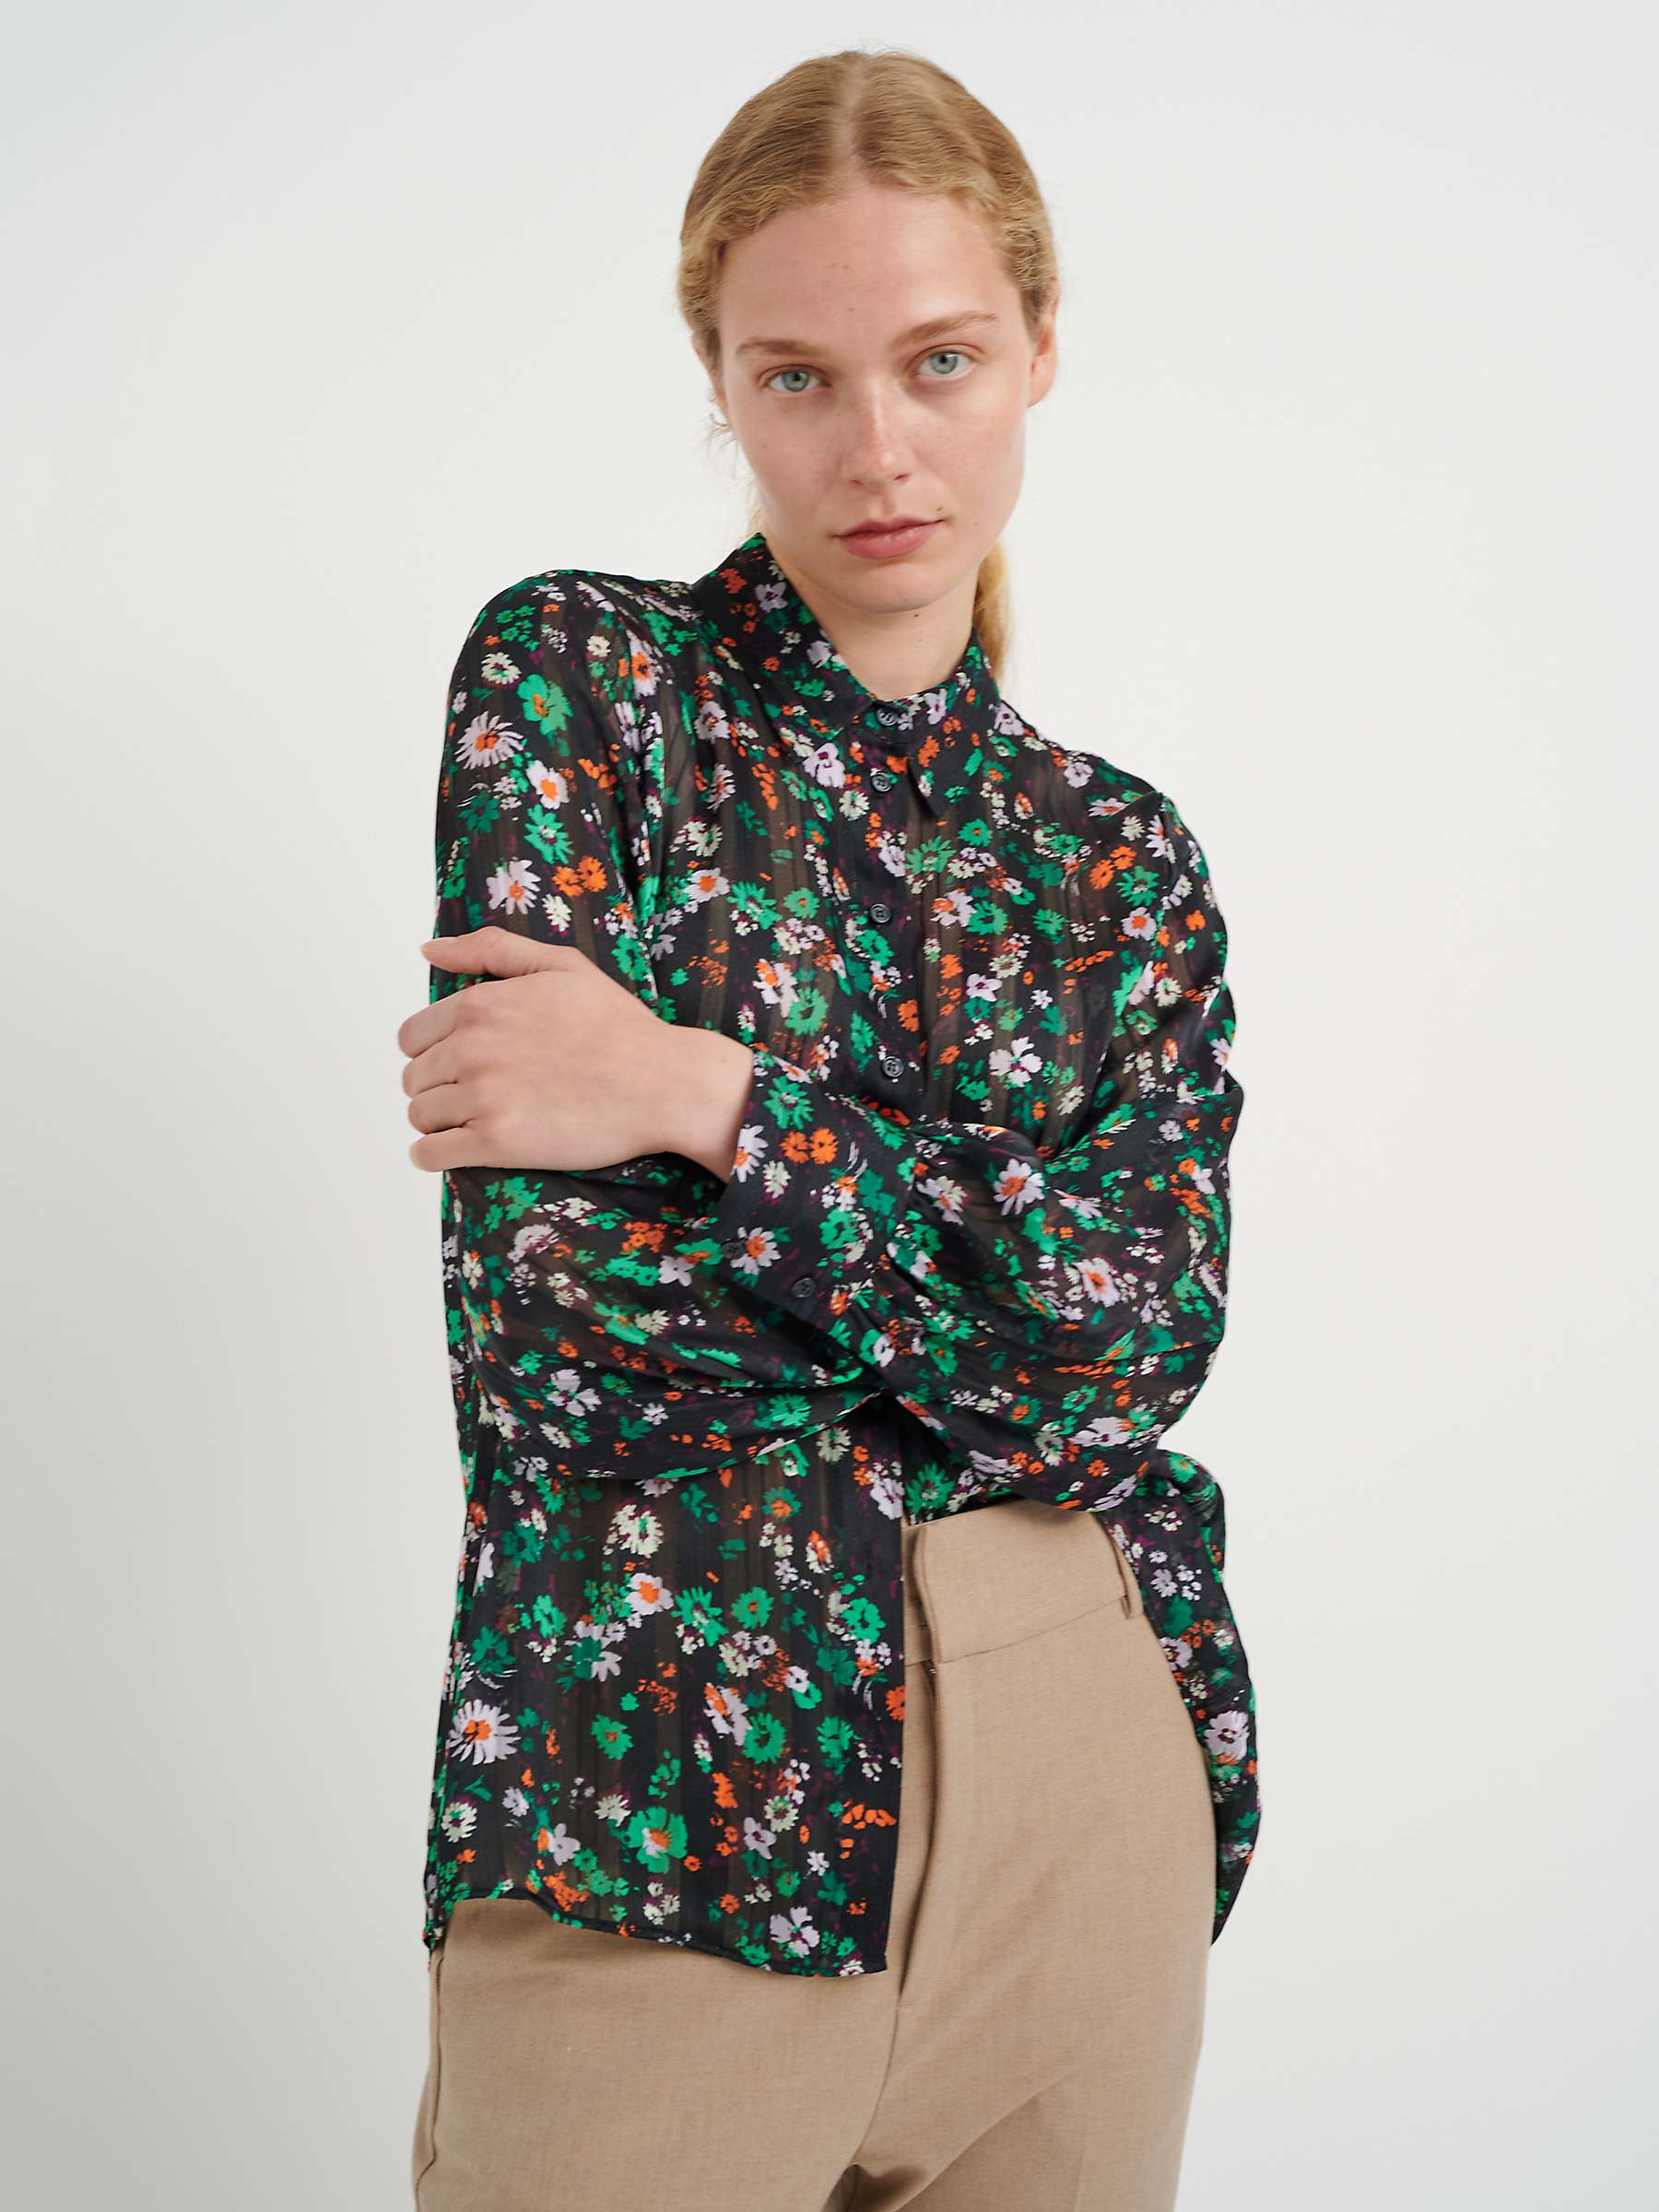 InWear Secia A-Line Floral Shirt, Green Flower at John Lewis & Partners